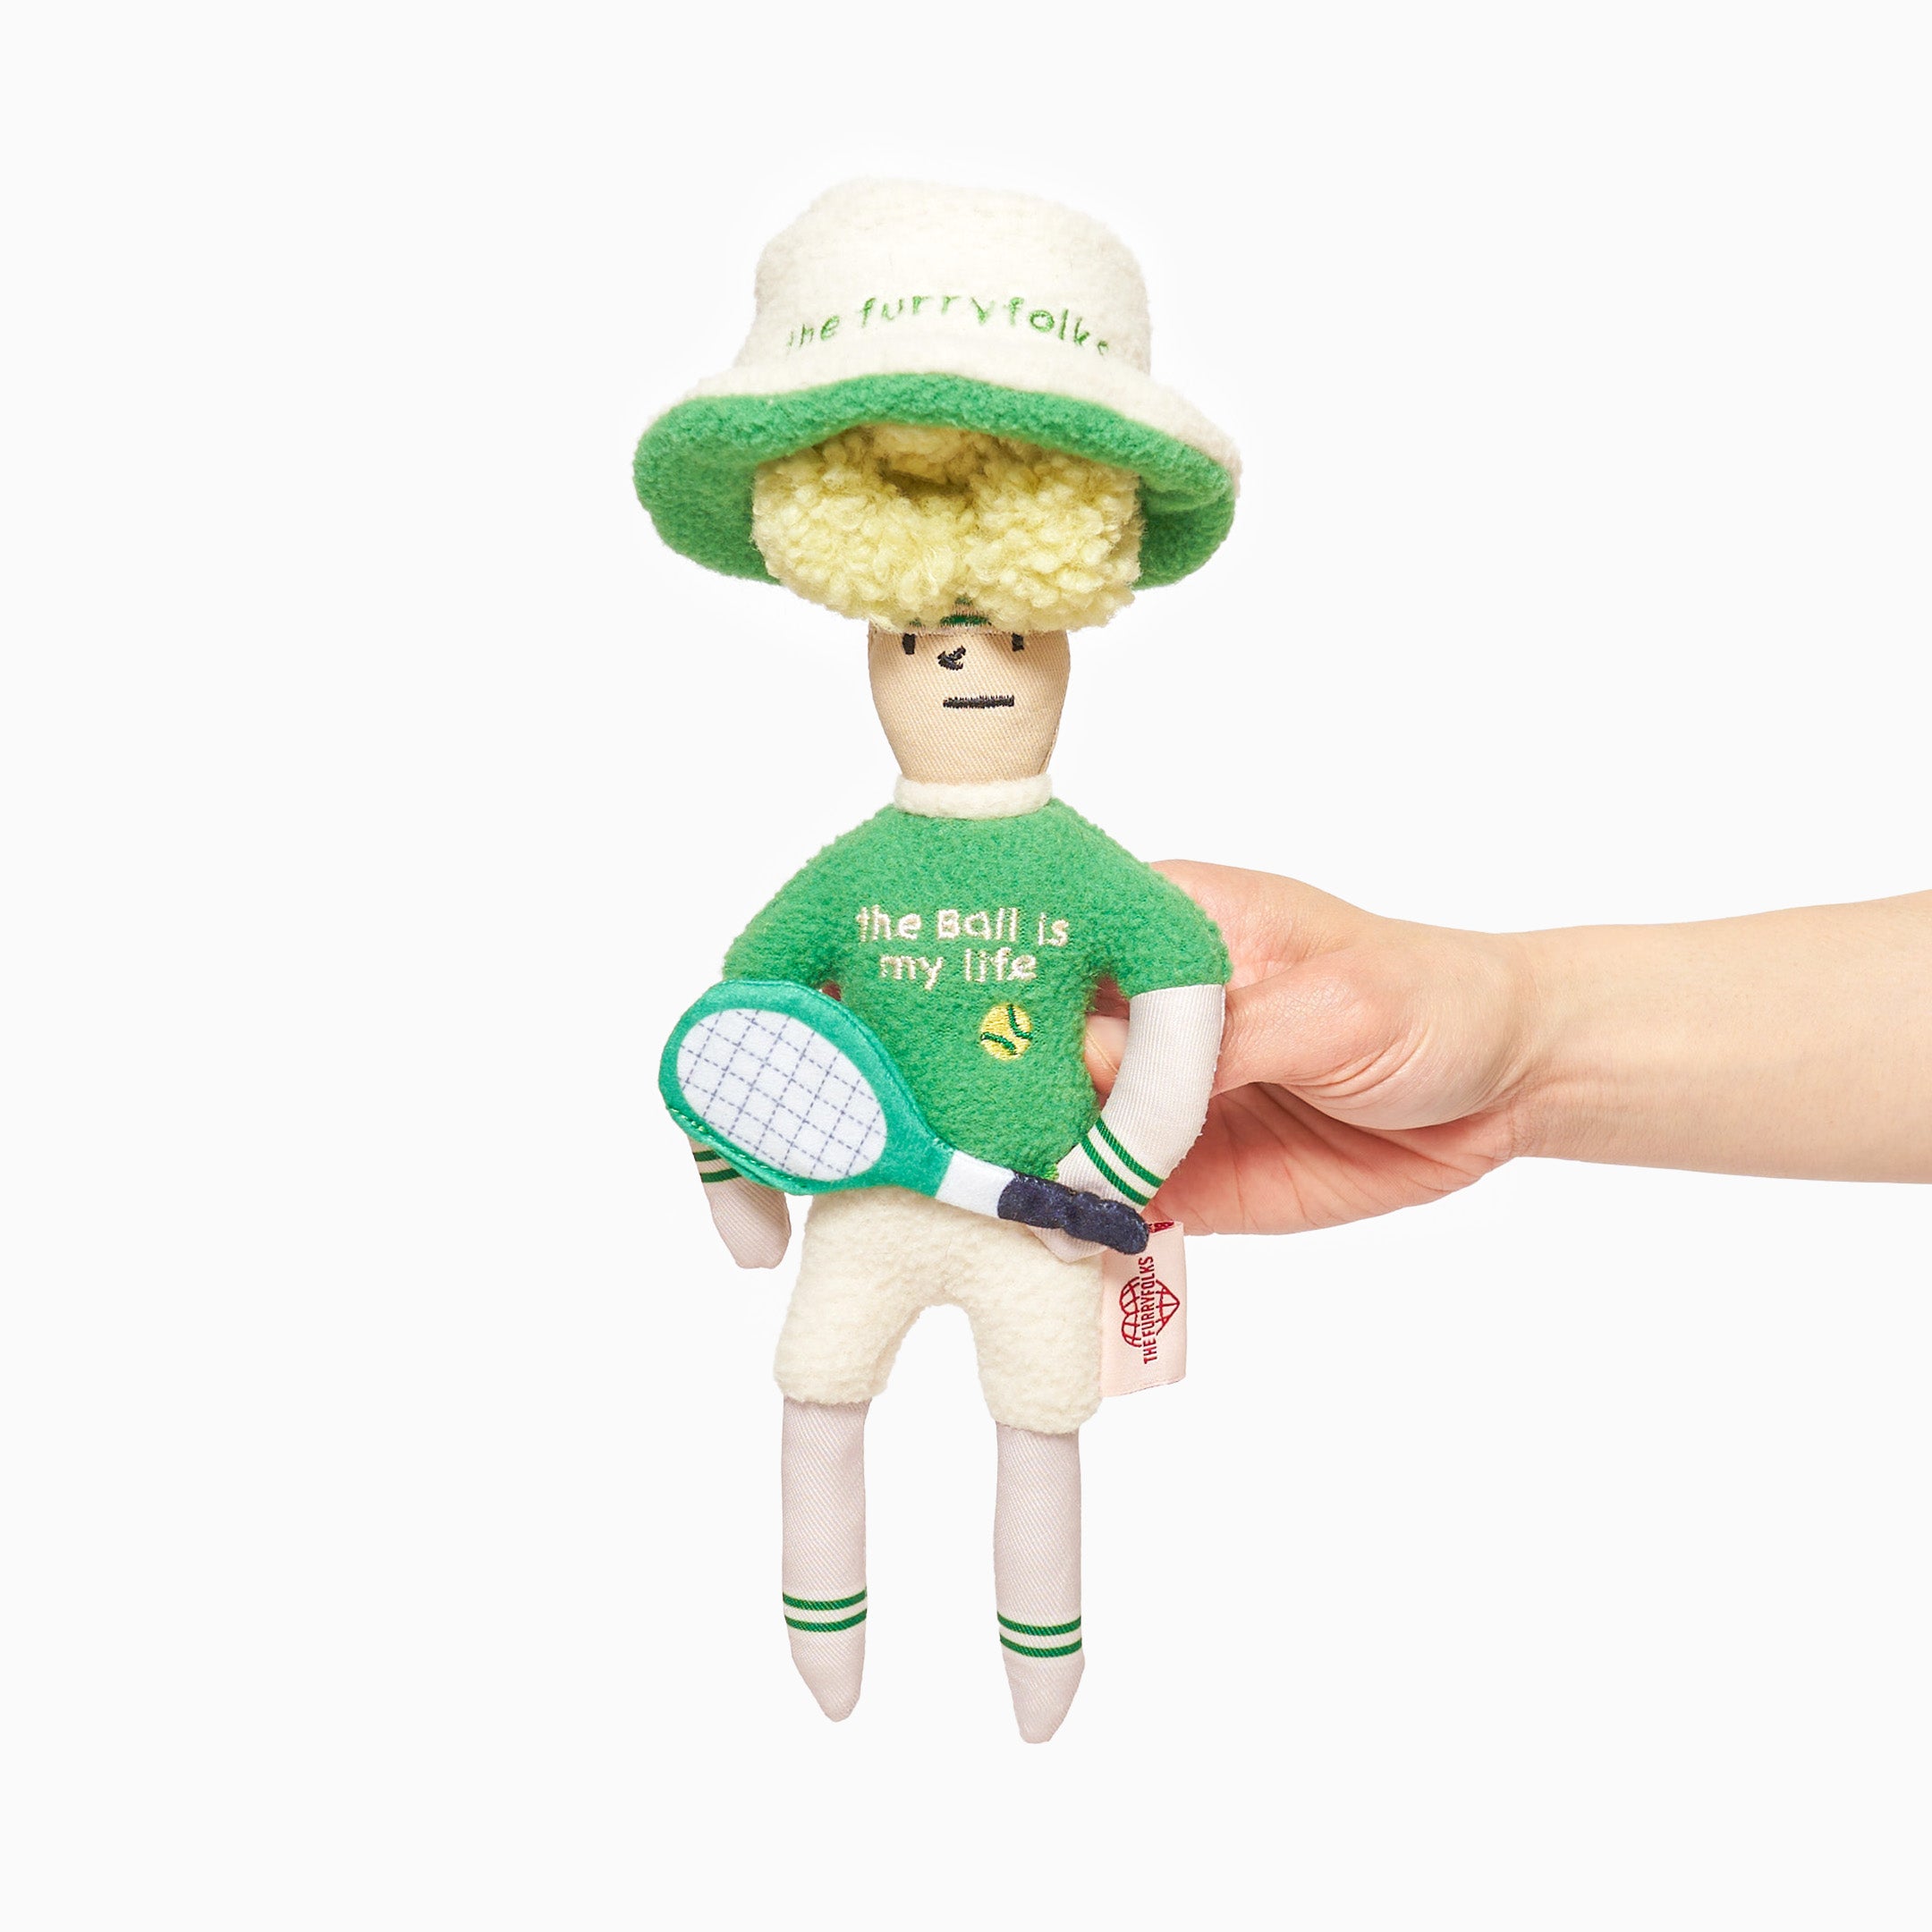  A hand is holding a plush toy styled as a tennis player, complete with a green hat labeled "the furryfolk," a green sweater with "the ball is my life" embroidered on it, and a white tennis racket. The toy has a simple, stitched face with a smile and eyes, and wears white, knee-high socks with green stripes. The design is whimsical and cartoonish.